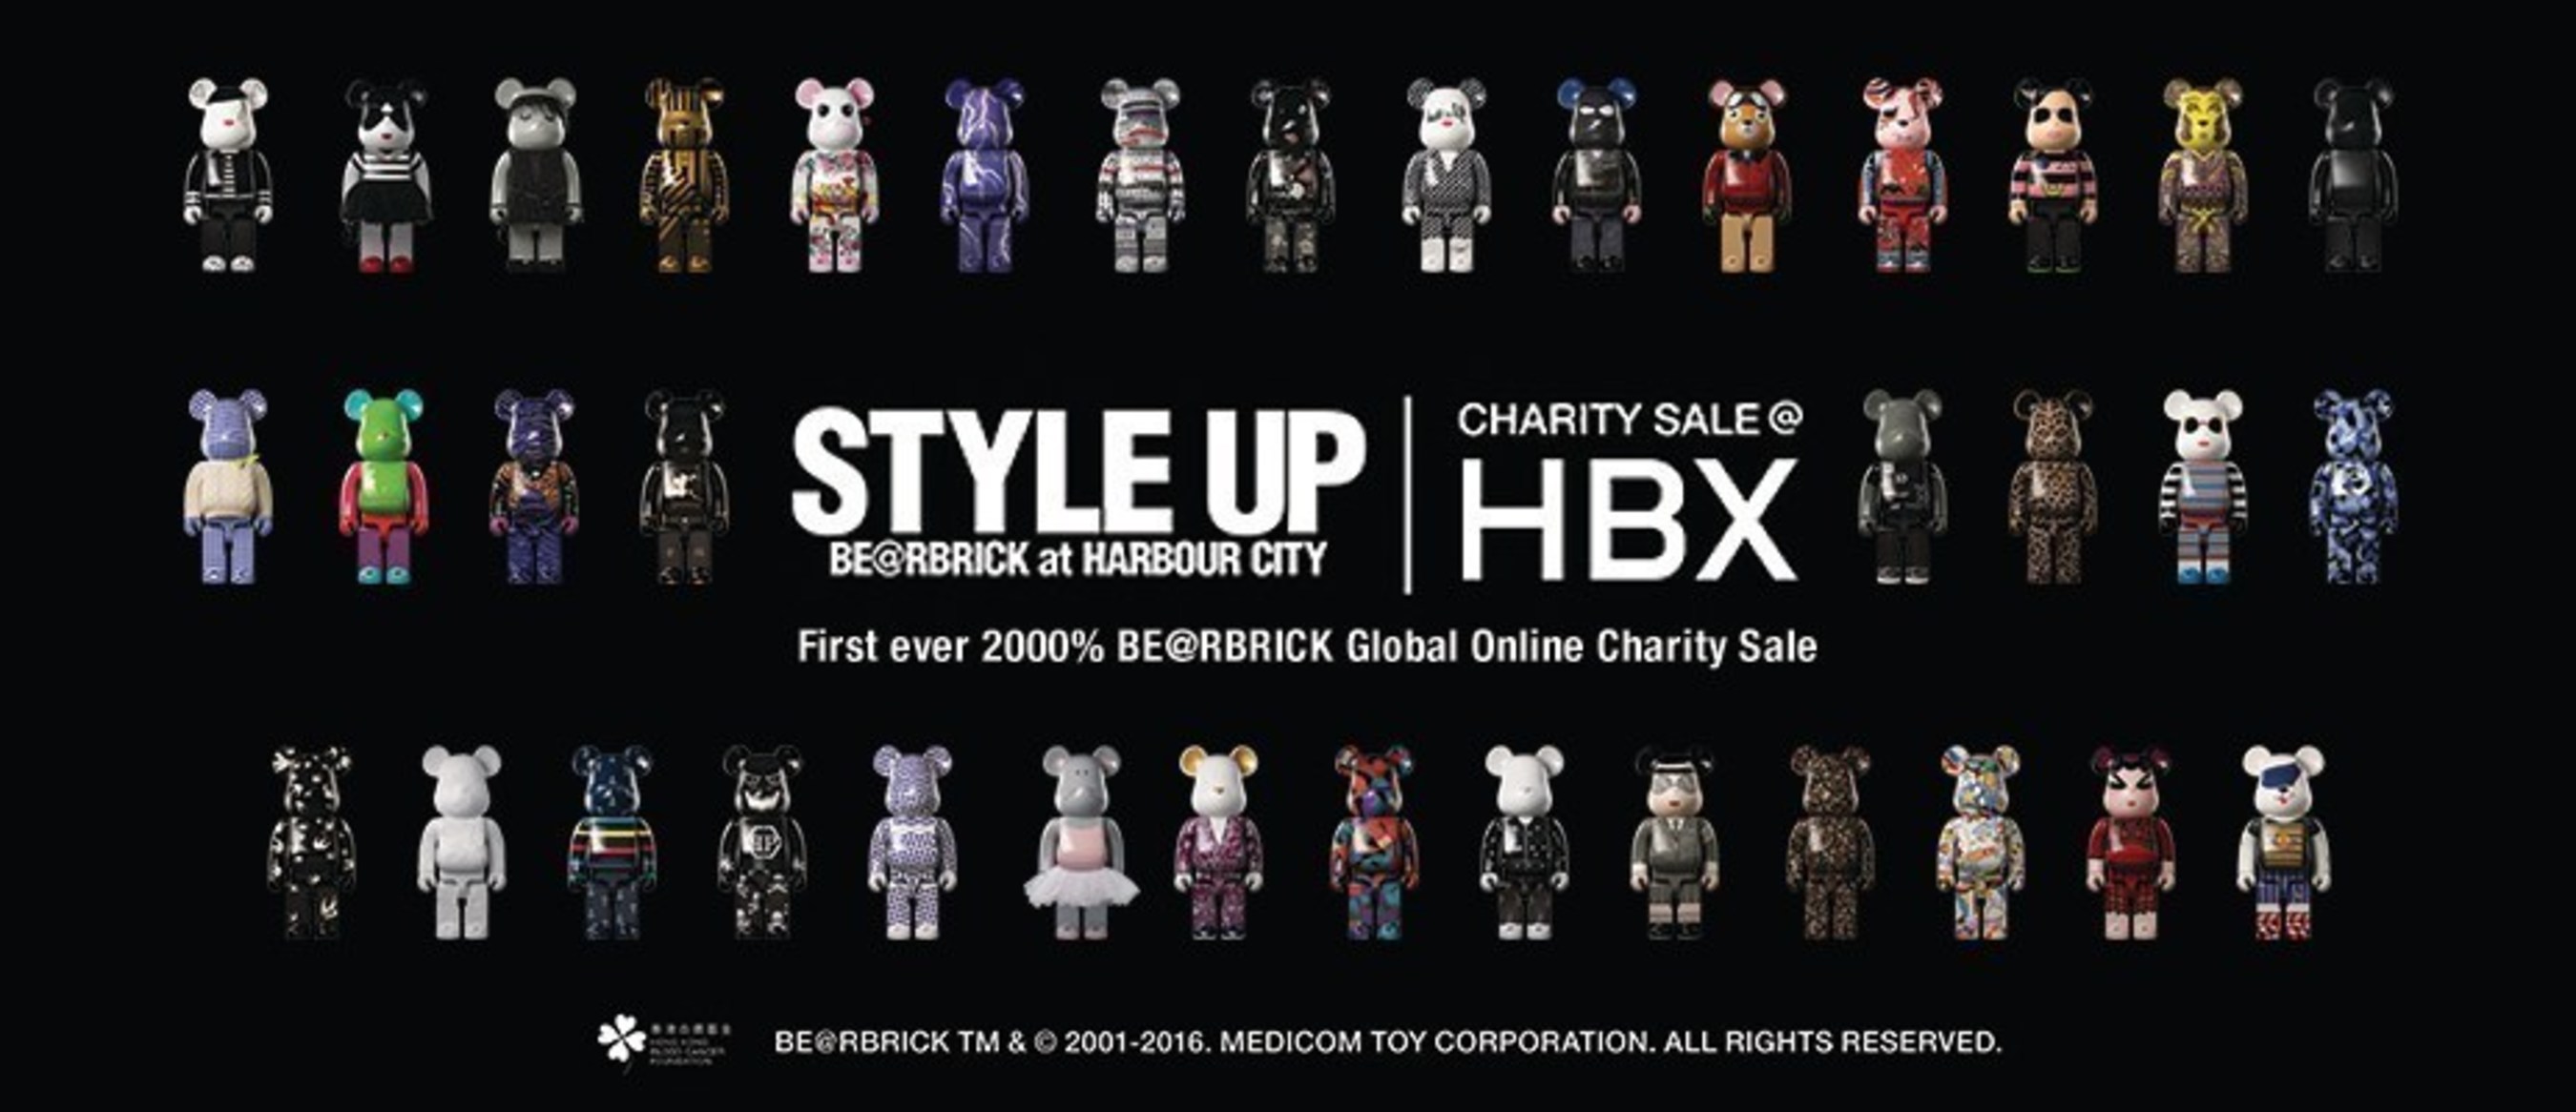 "Style Up BE@RBRICK at Harbour City"